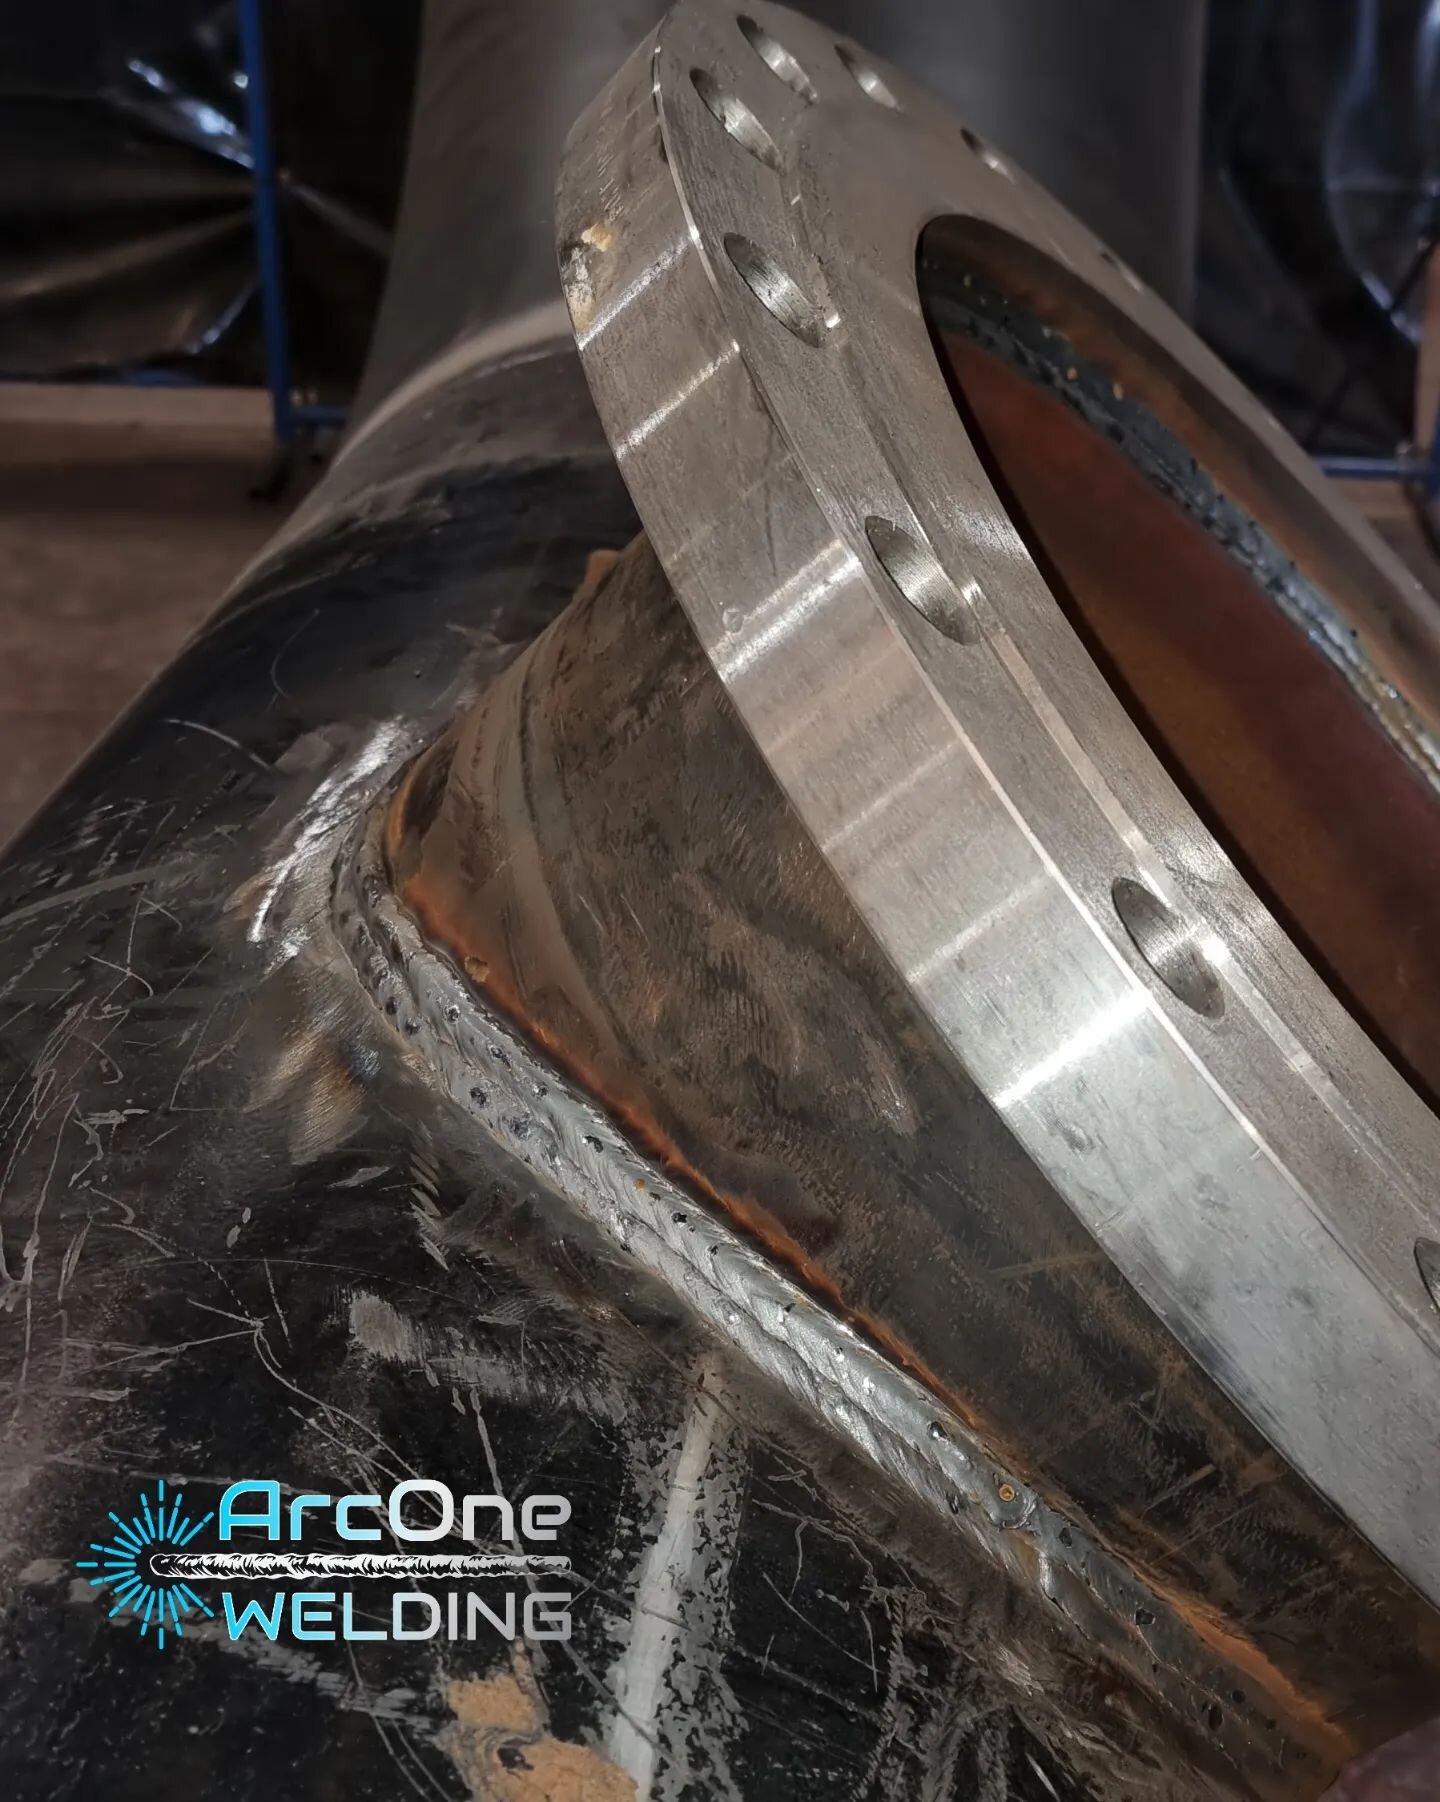 Not the biggest pipe ive ever made but its still impressive none the less, 24&quot; pipe with an 18&quot; square branch.
 ●
●
○
○
●
○
#welding #pipewelder #weldporn #migwelding #weldernation #welder #welderzone #weldernation #weldporn&nbsp;#welding #